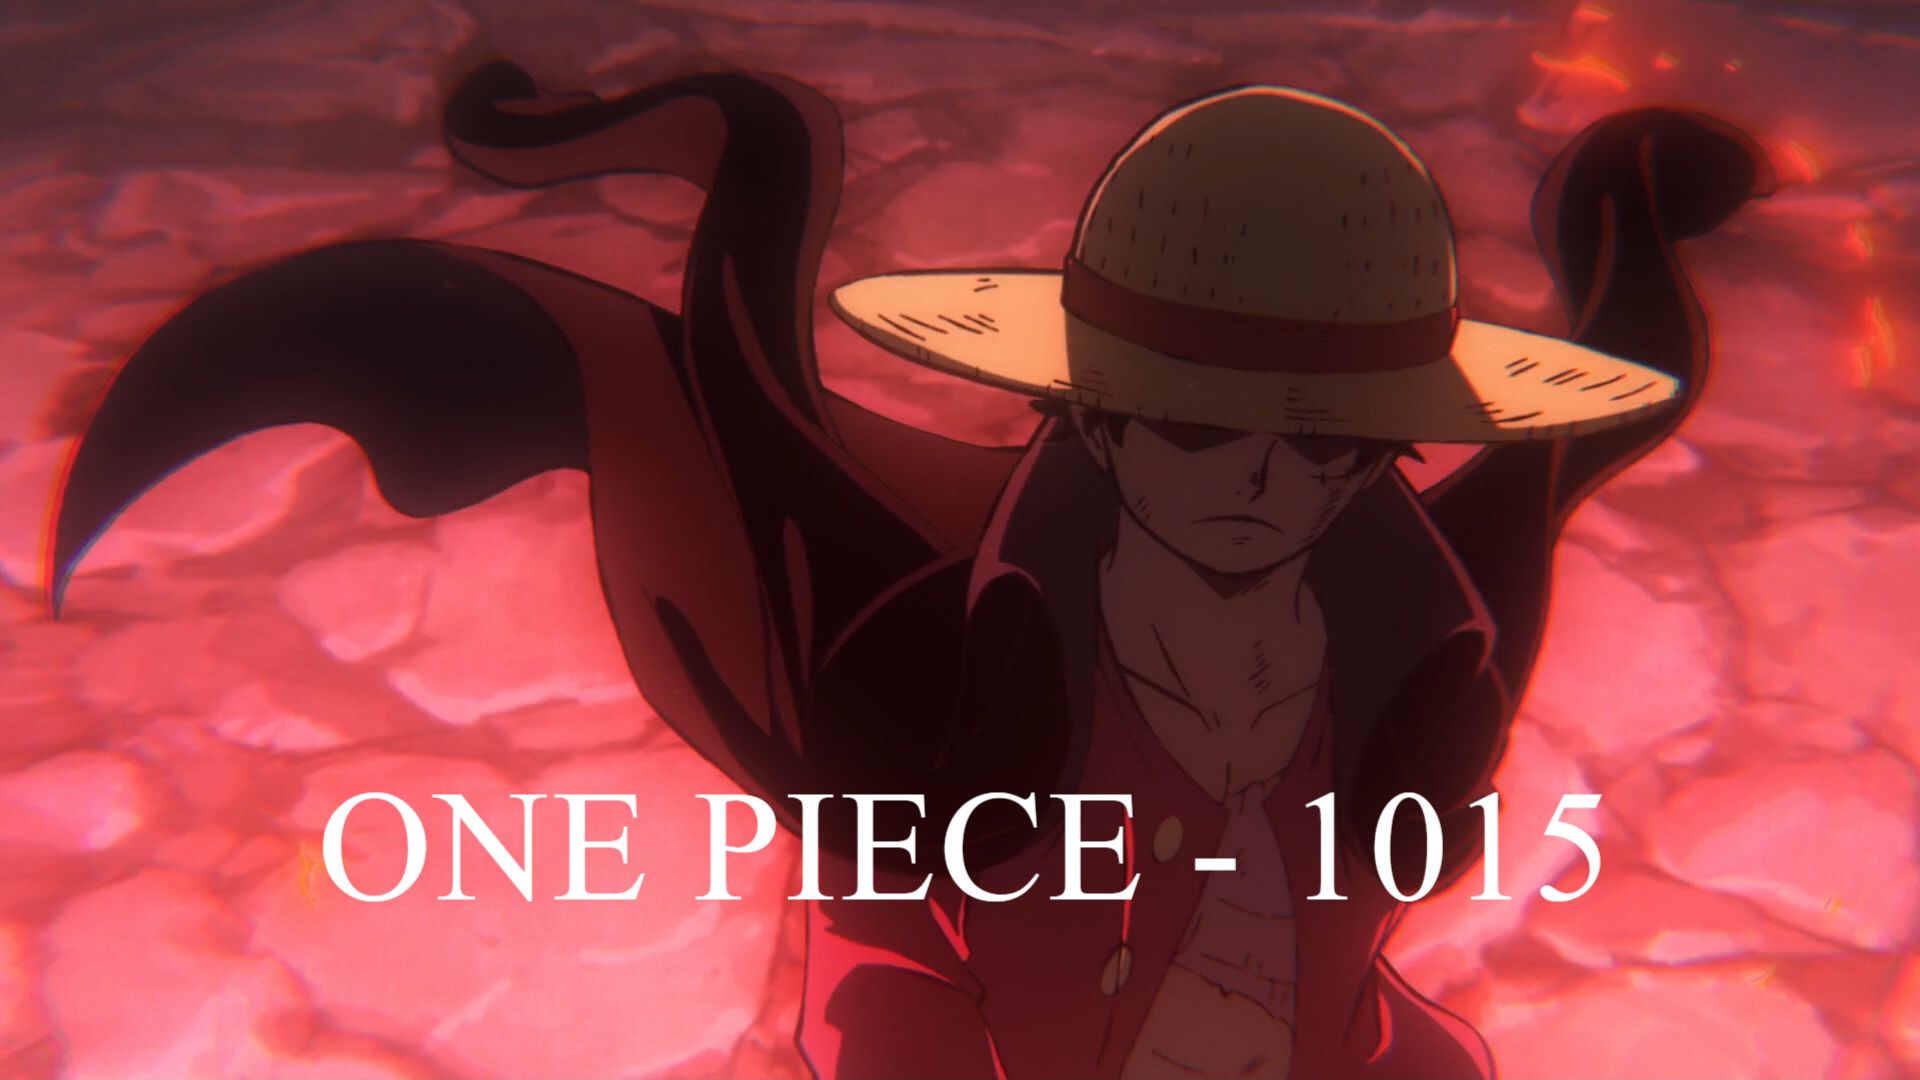 THIS IS 4K ANIME (One Piece Ep 1015) 